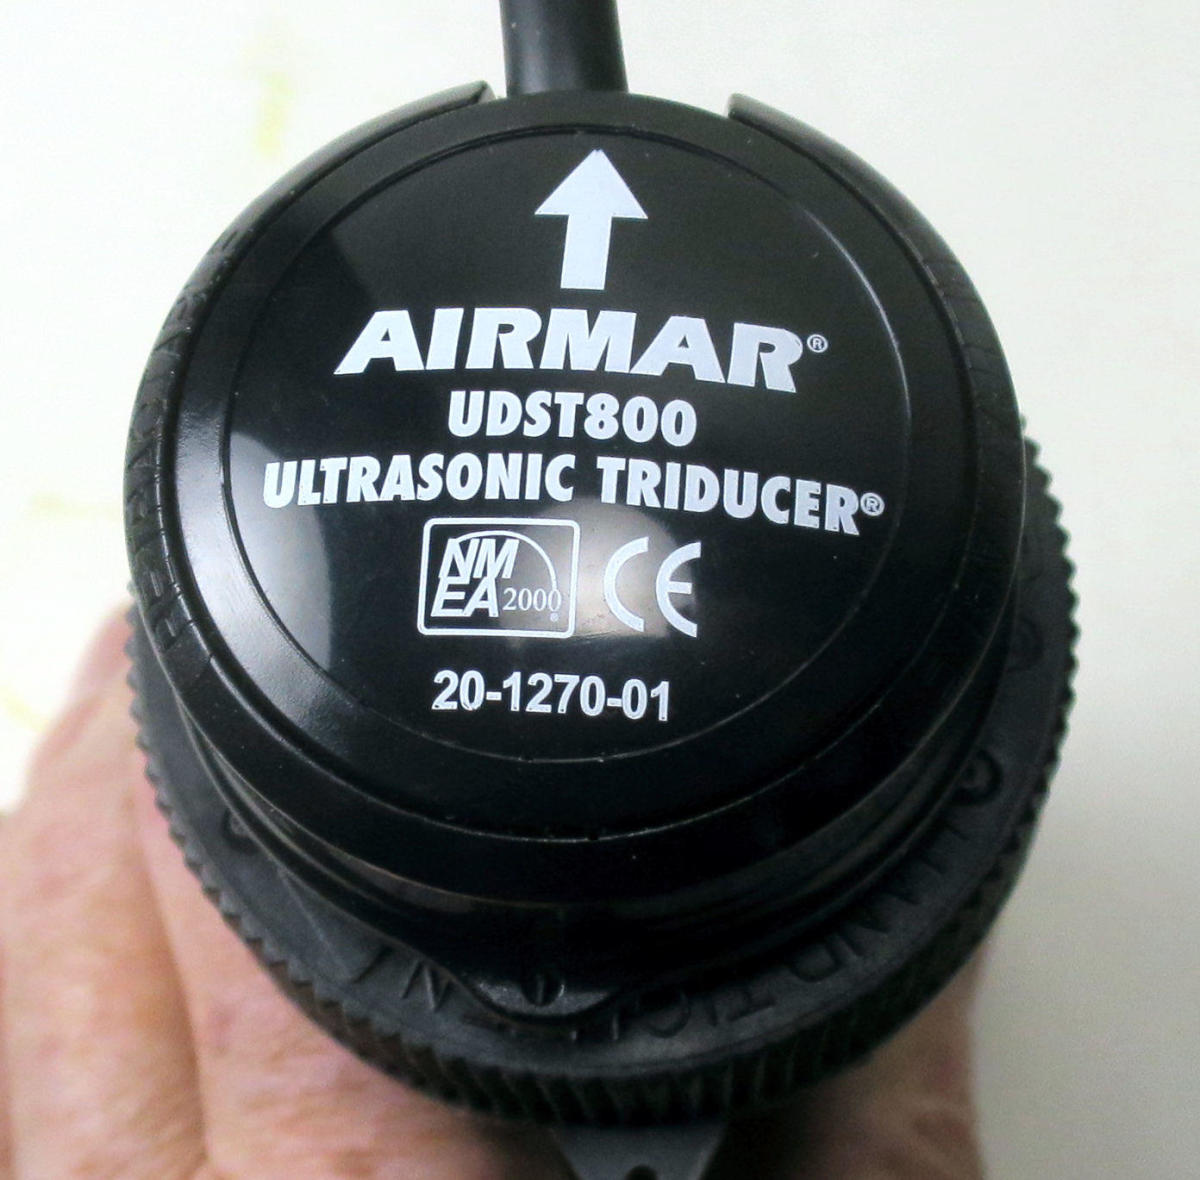 01-Airmar_UDST800_ultrasonic_triducer_for_real_2-2018_cPanbo